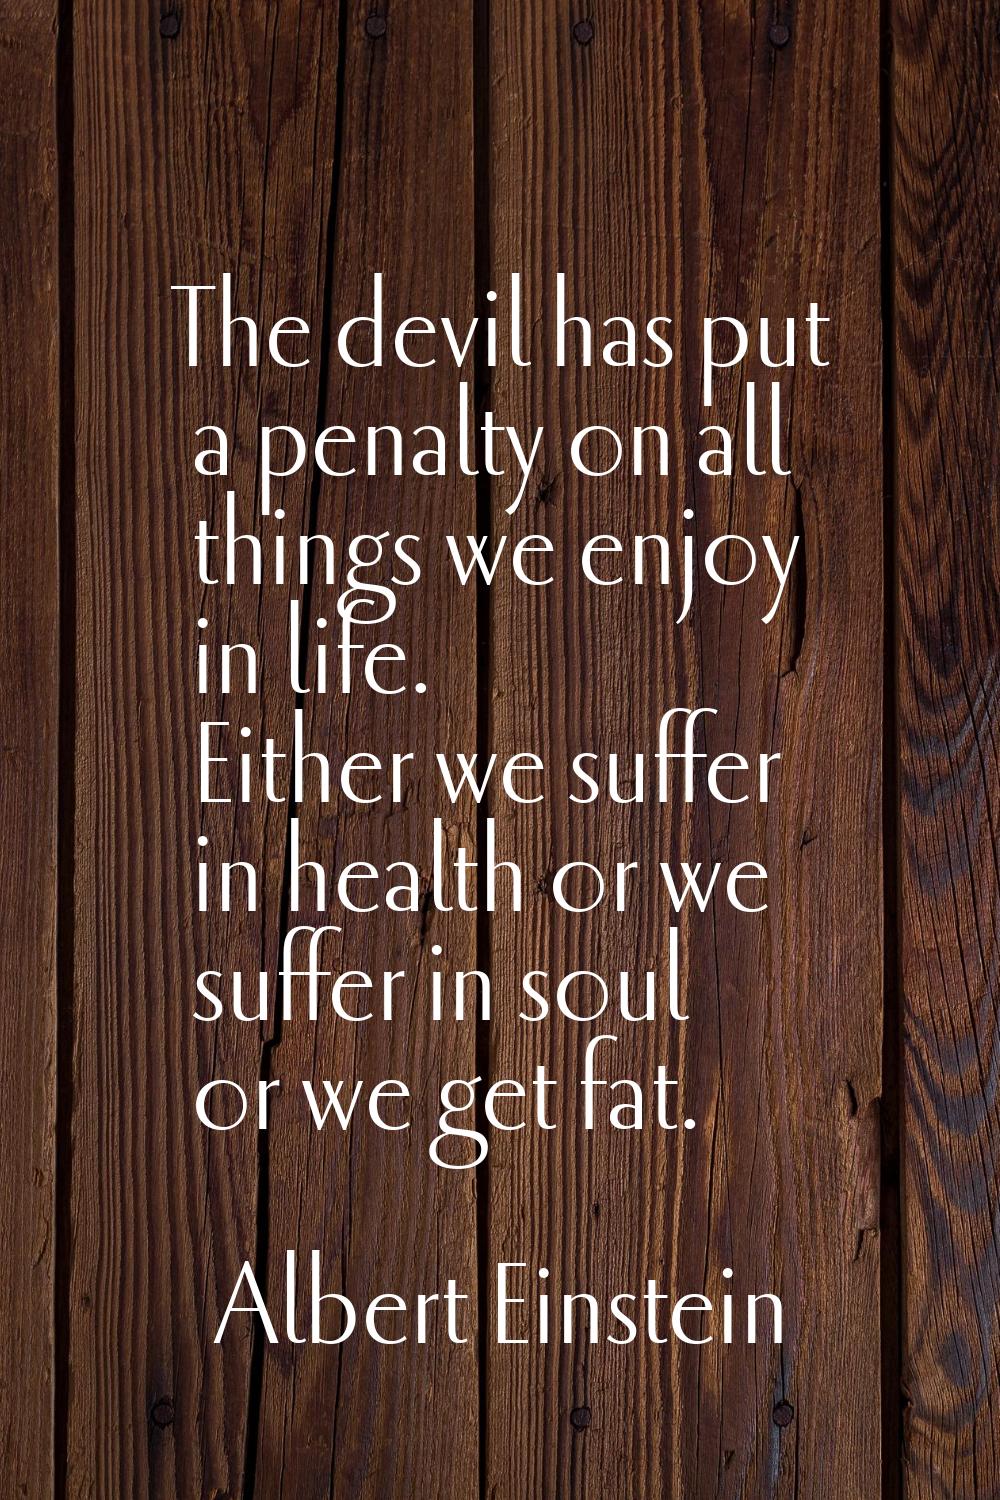 The devil has put a penalty on all things we enjoy in life. Either we suffer in health or we suffer